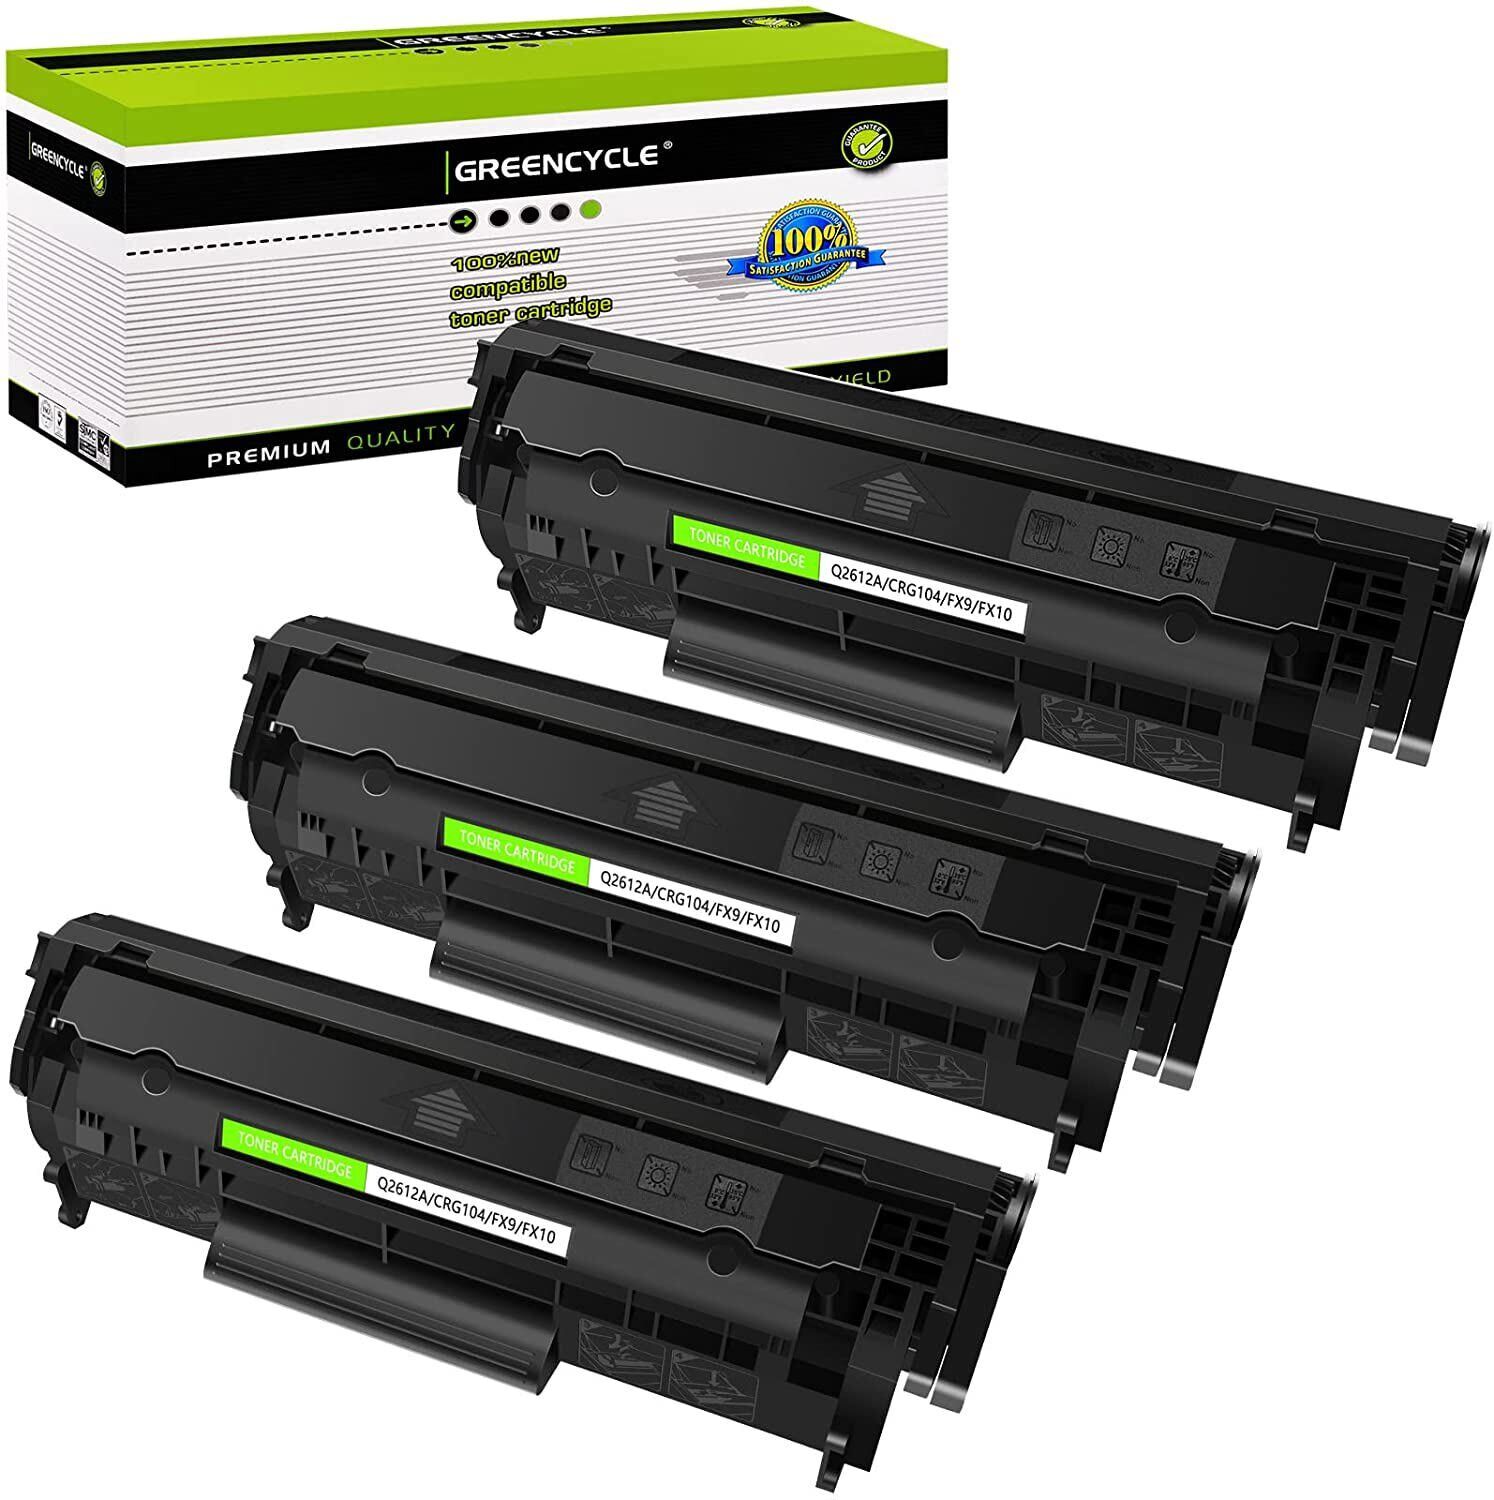 GREENCYCLE 3PK Q2612A Toner Cartridge Compatible with HP LaserJet 1022 3015 3055